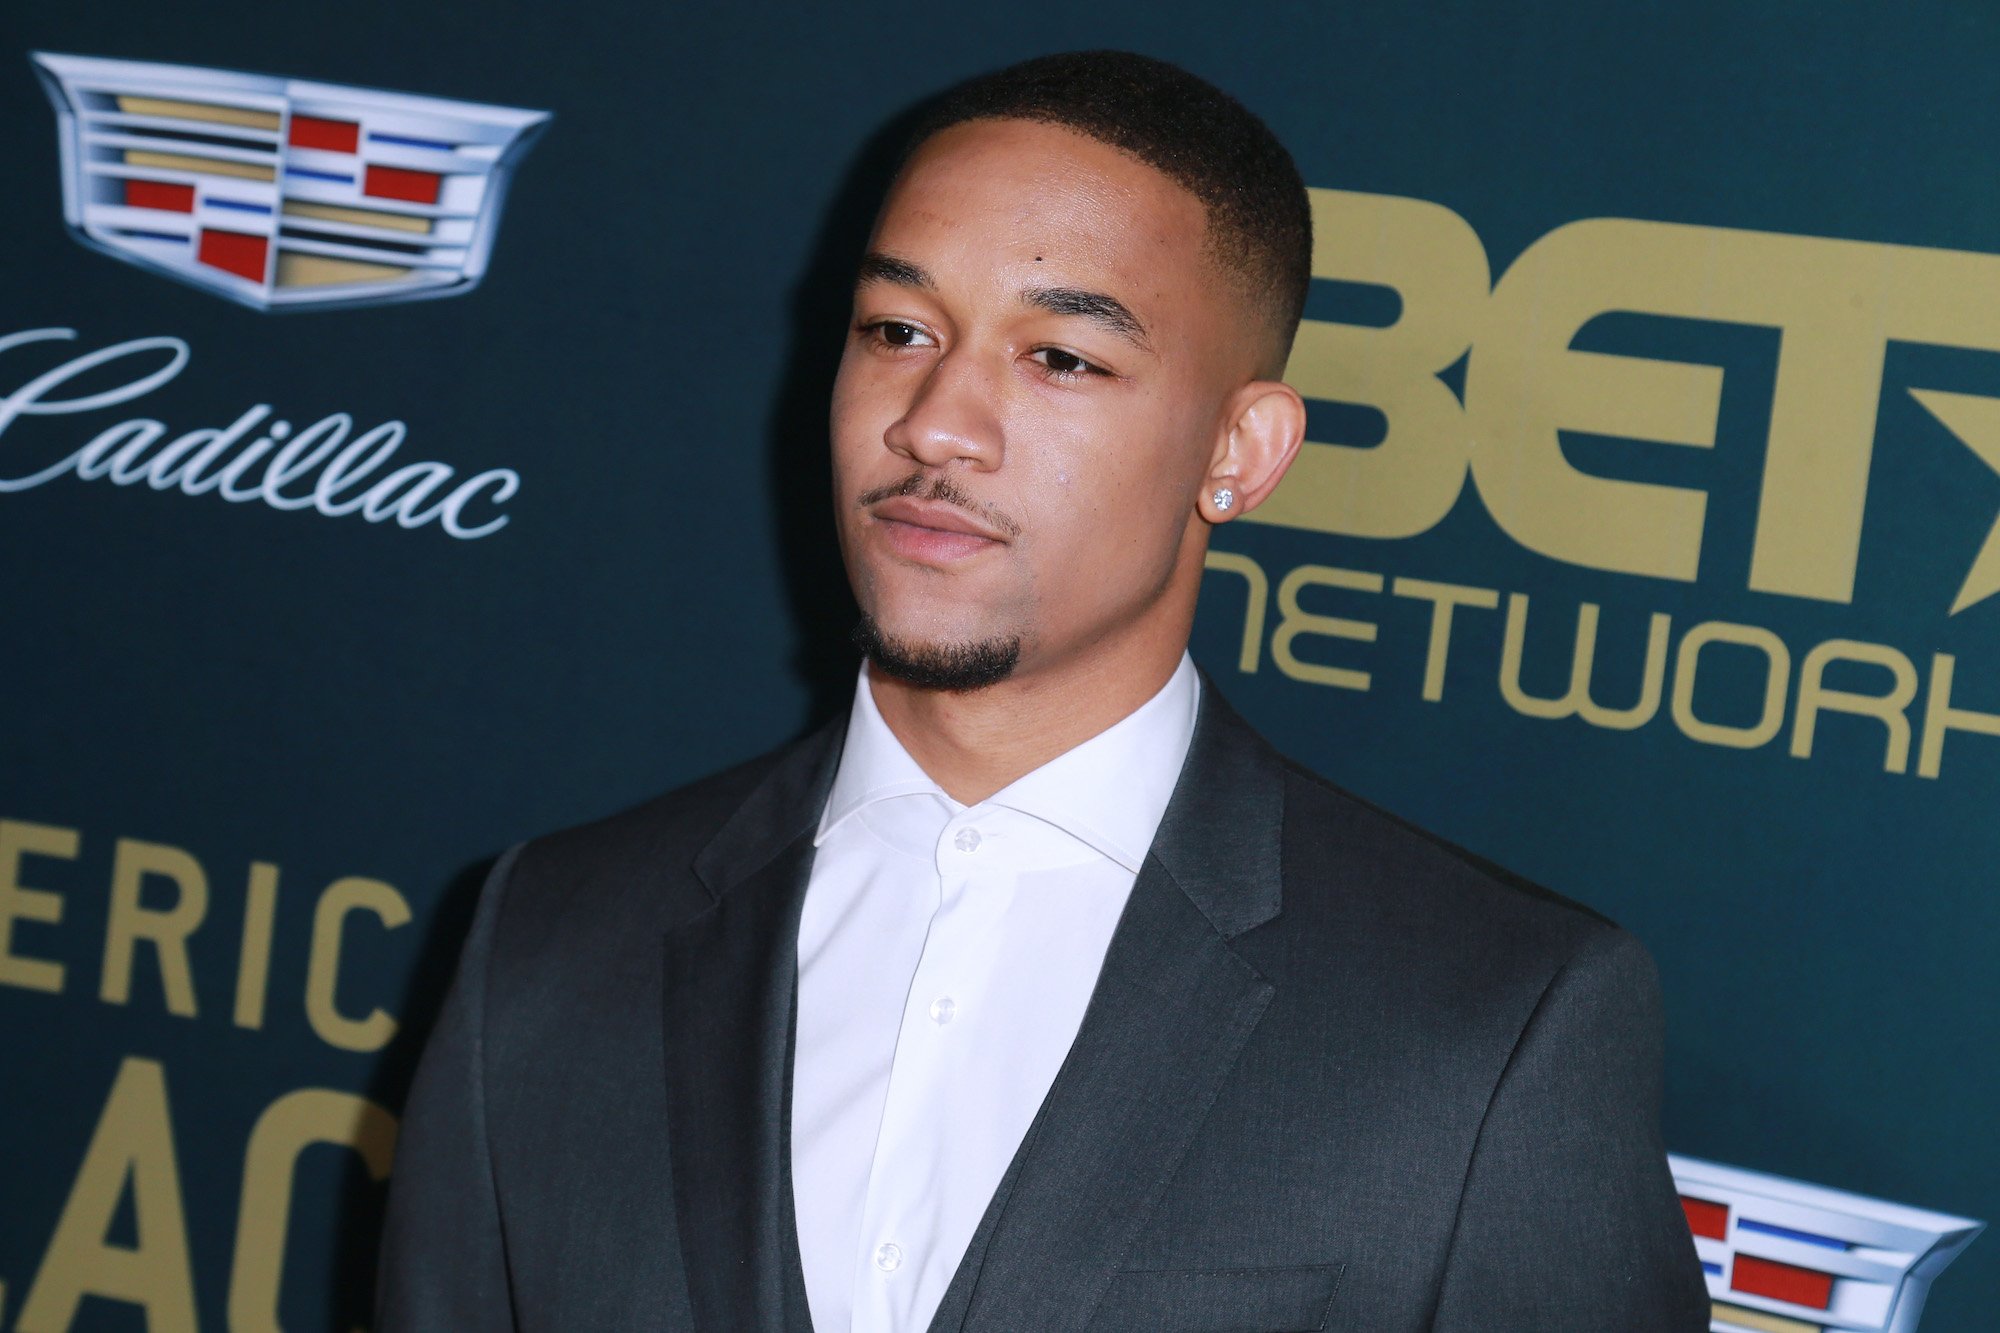 Peyton Alex Smith wearing a black suit with a white shirt to the 2018 American Black Film Festival Honors Awards.